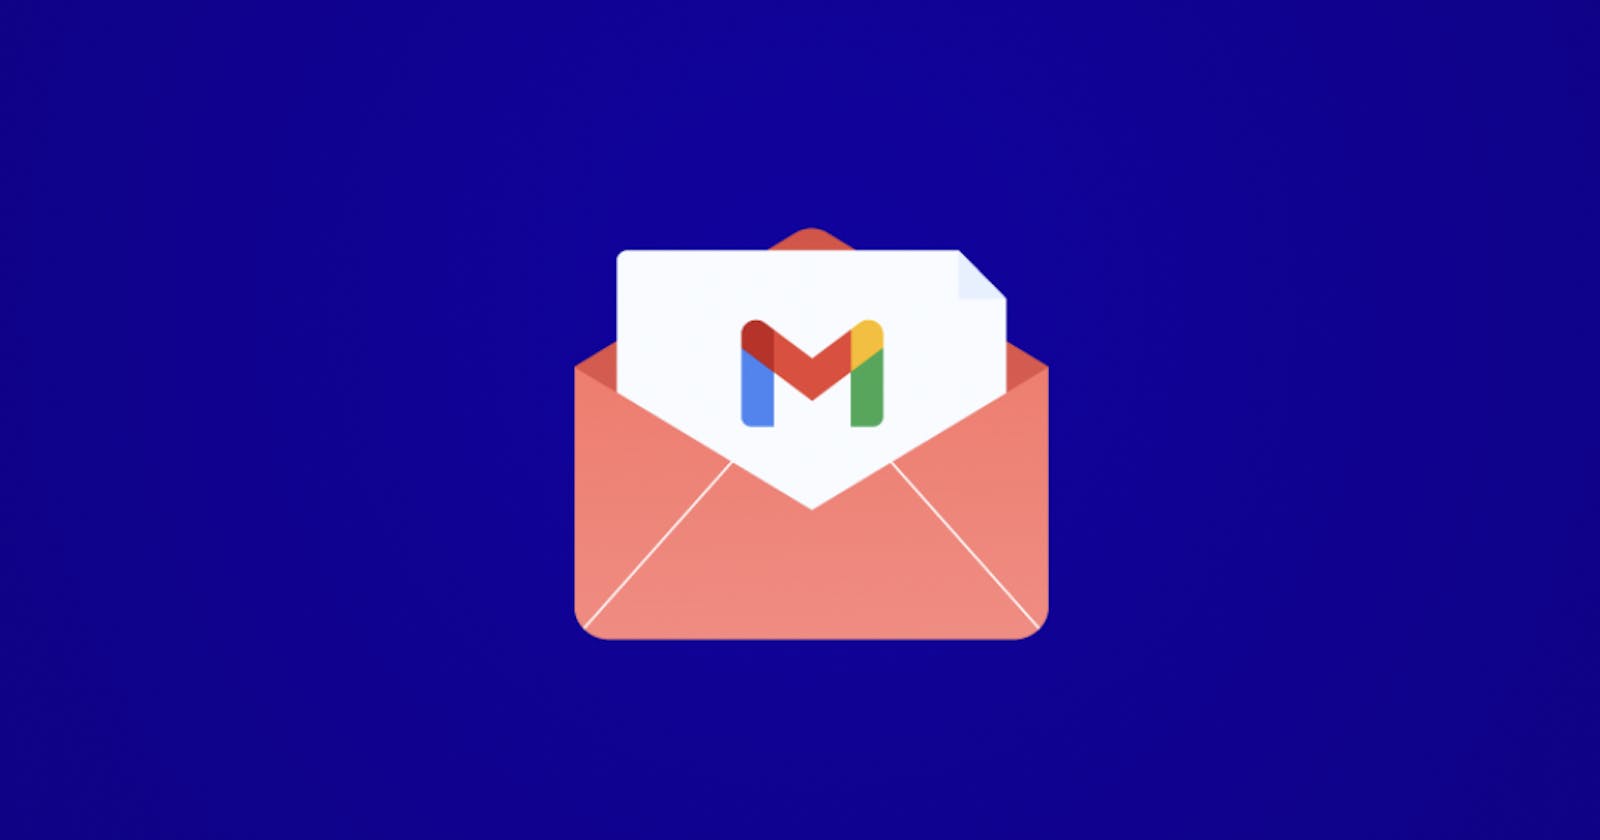 How to send a newsletter with Gmail in 2022?